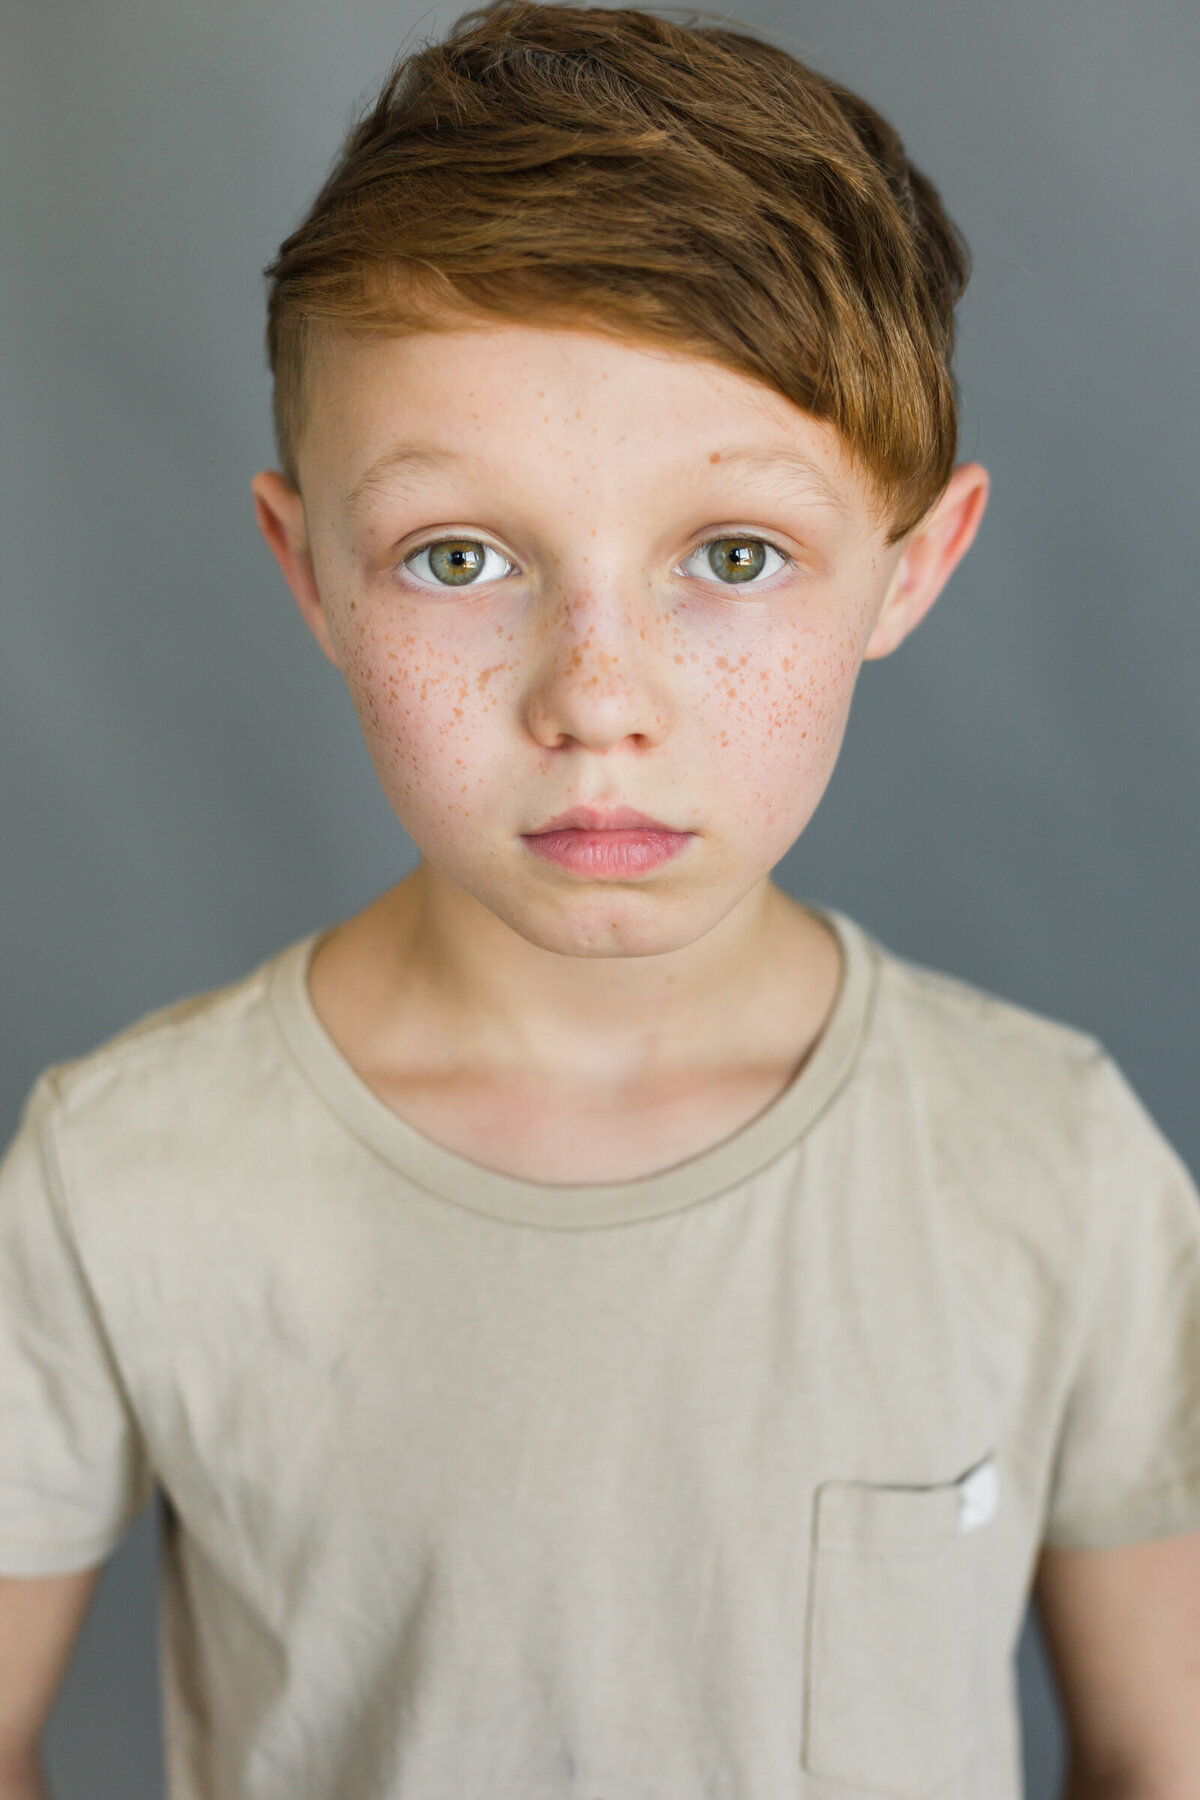 child portrait photography and head shot for young boy